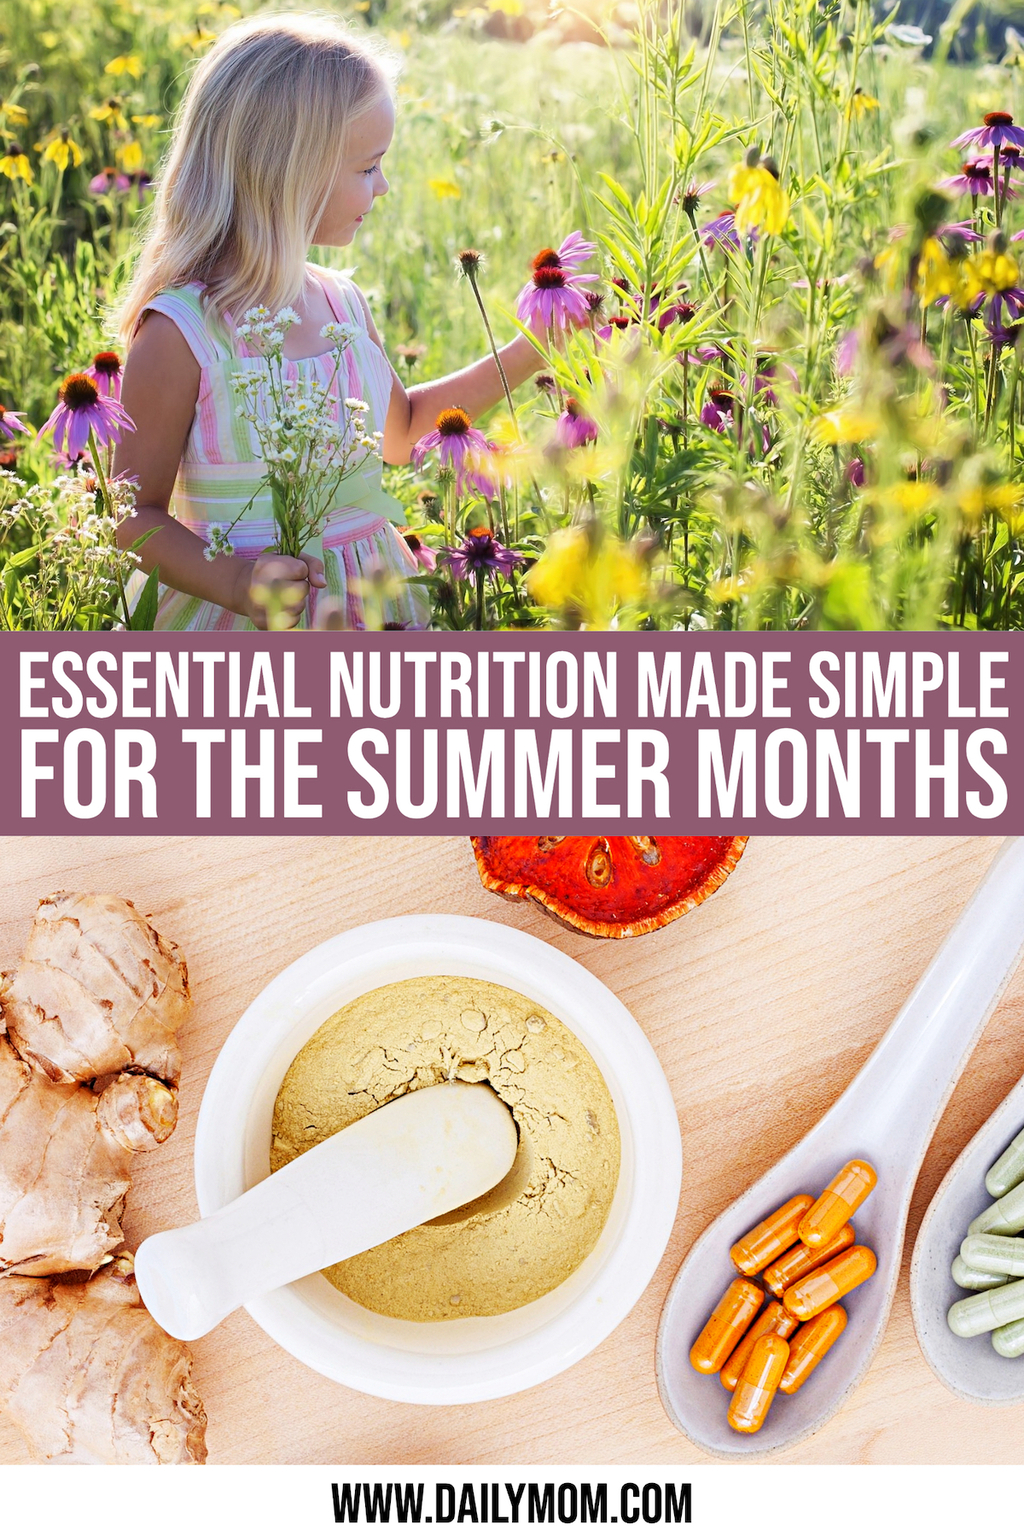 Staying Healthy This Season With 25 Summer Supplements & Cleaning Essentials